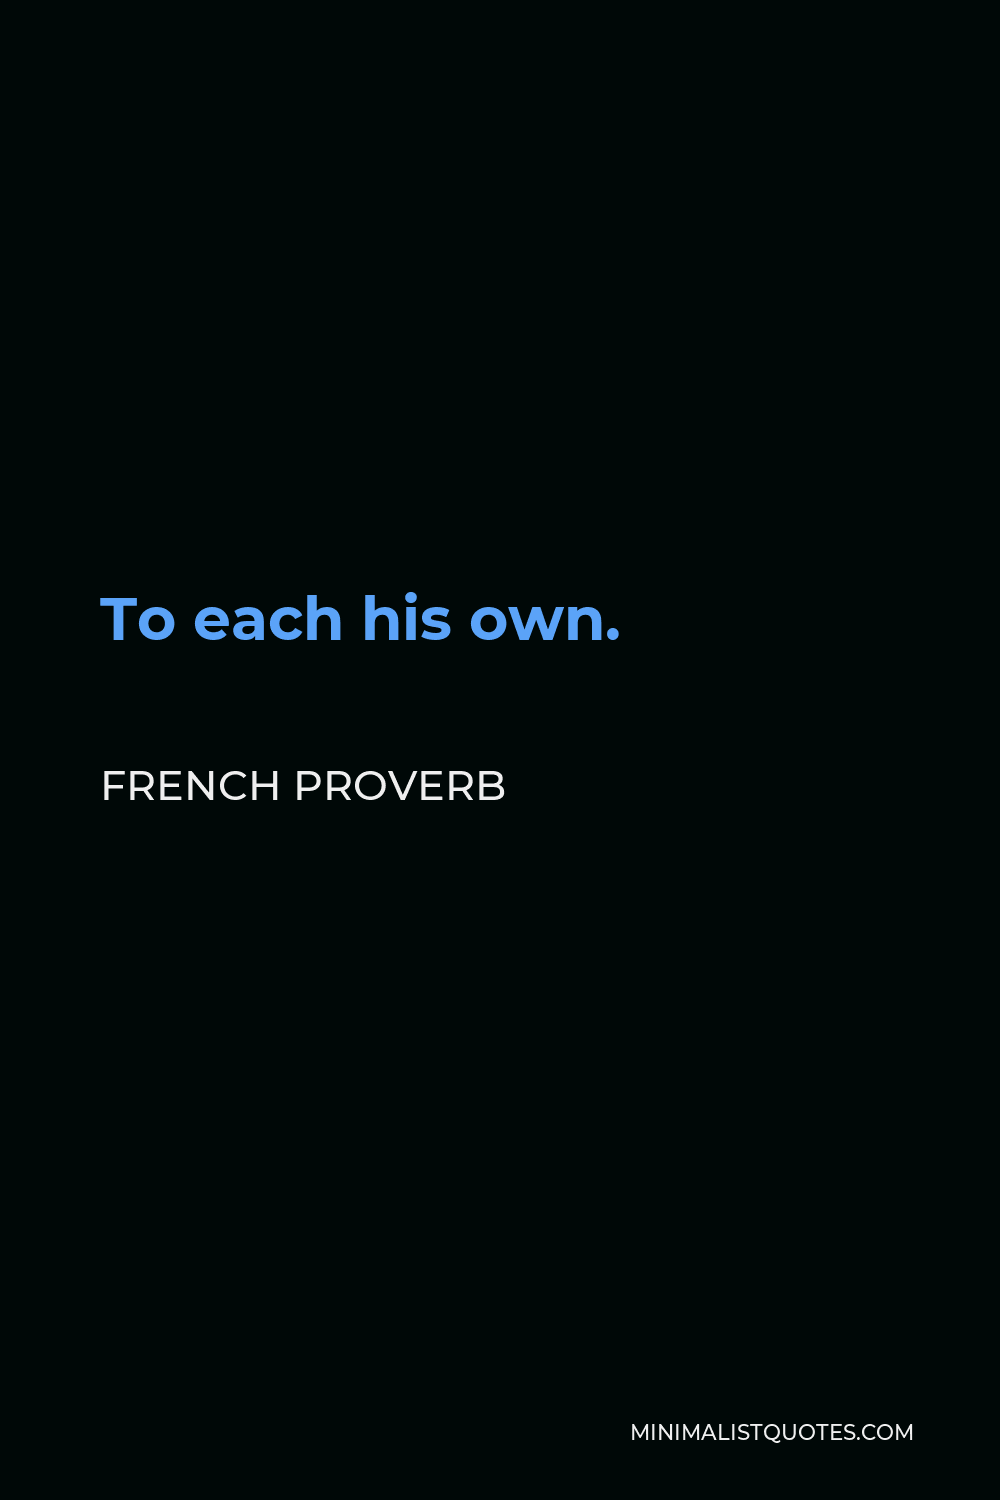 French Proverb Quote - To each his own.